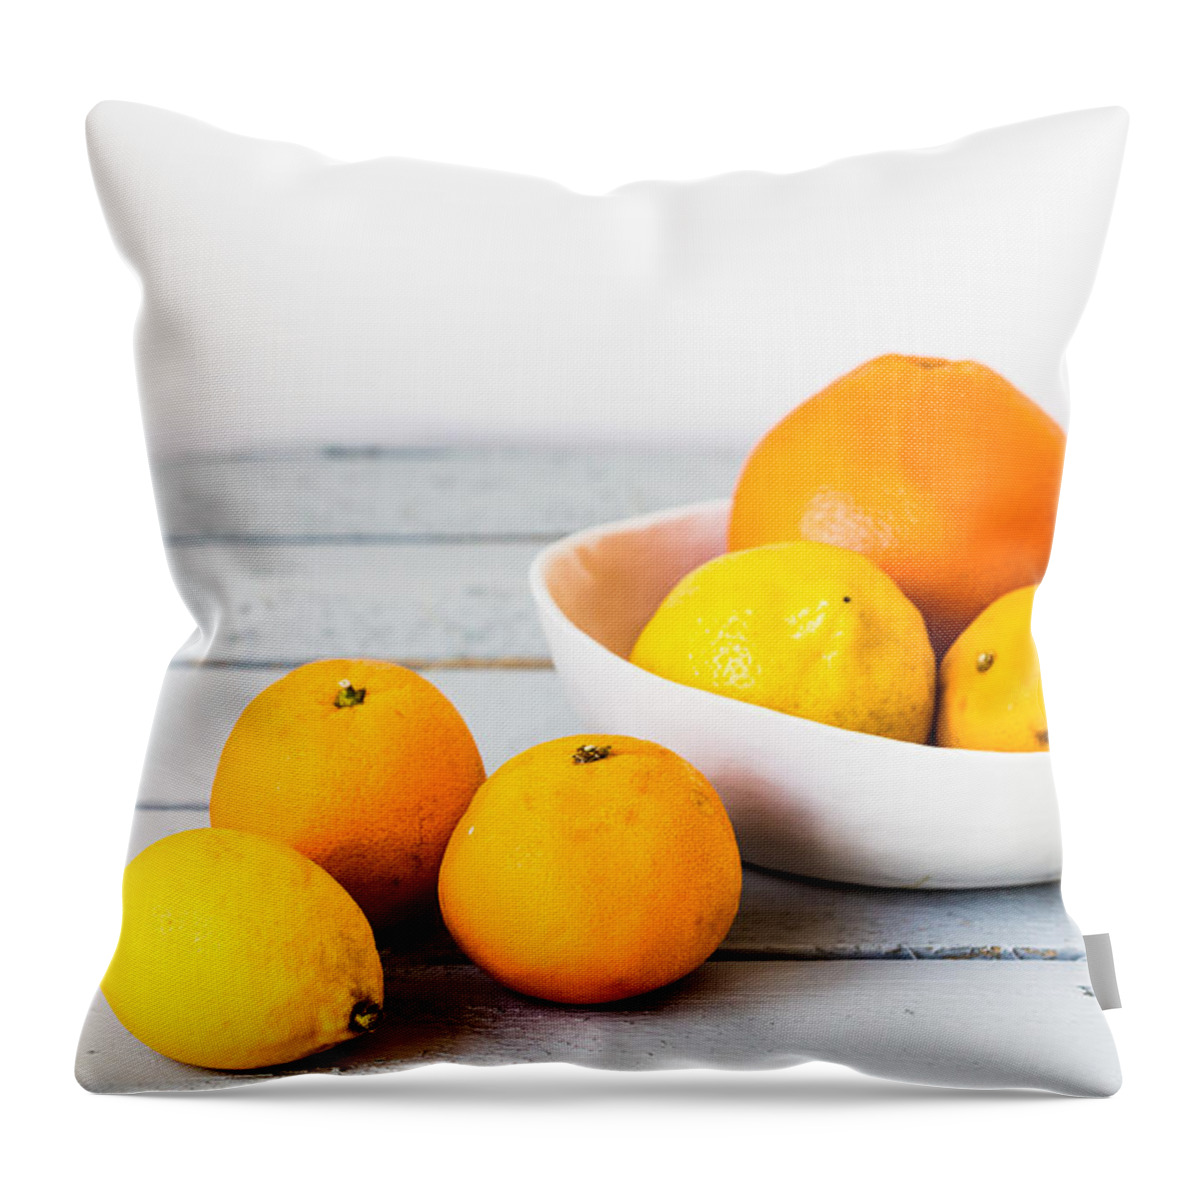 Citrus Fruit Throw Pillow featuring the photograph Assorted Citrus Fruits by Philippe Garo